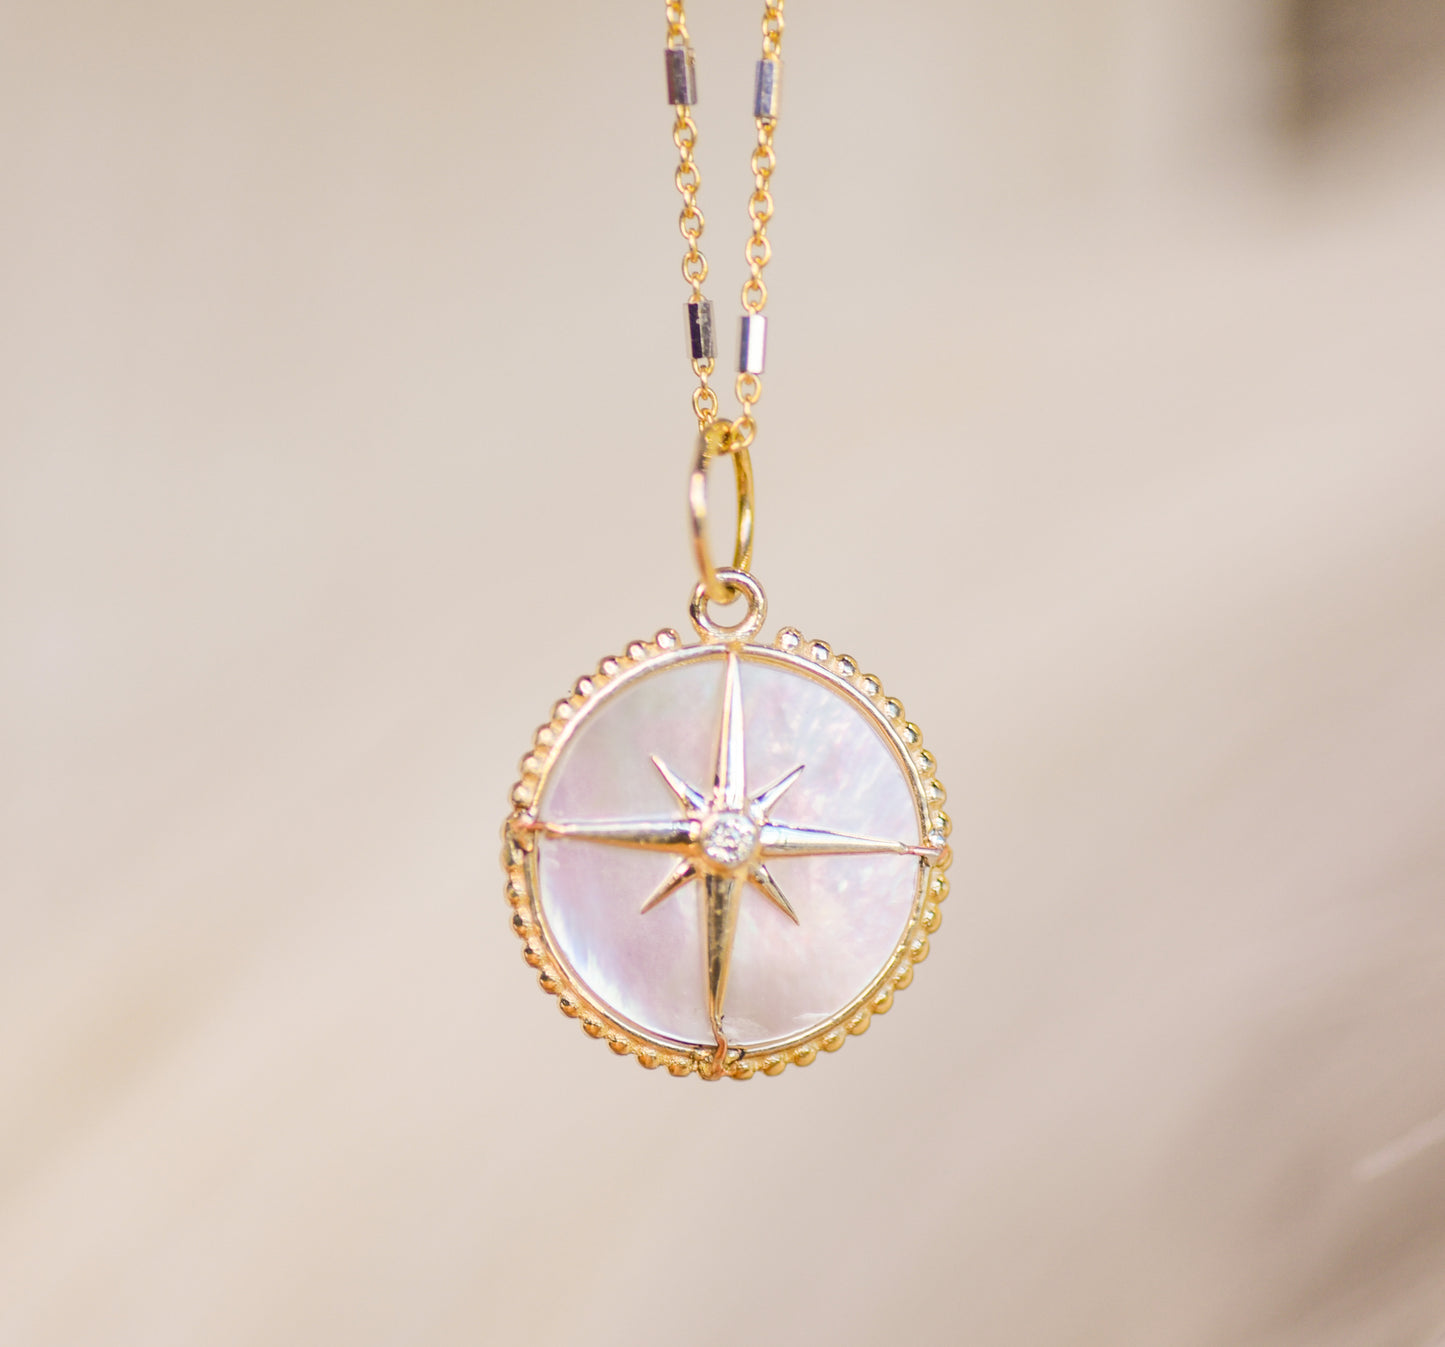 Mother of Pearl and Diamond North Star Necklace